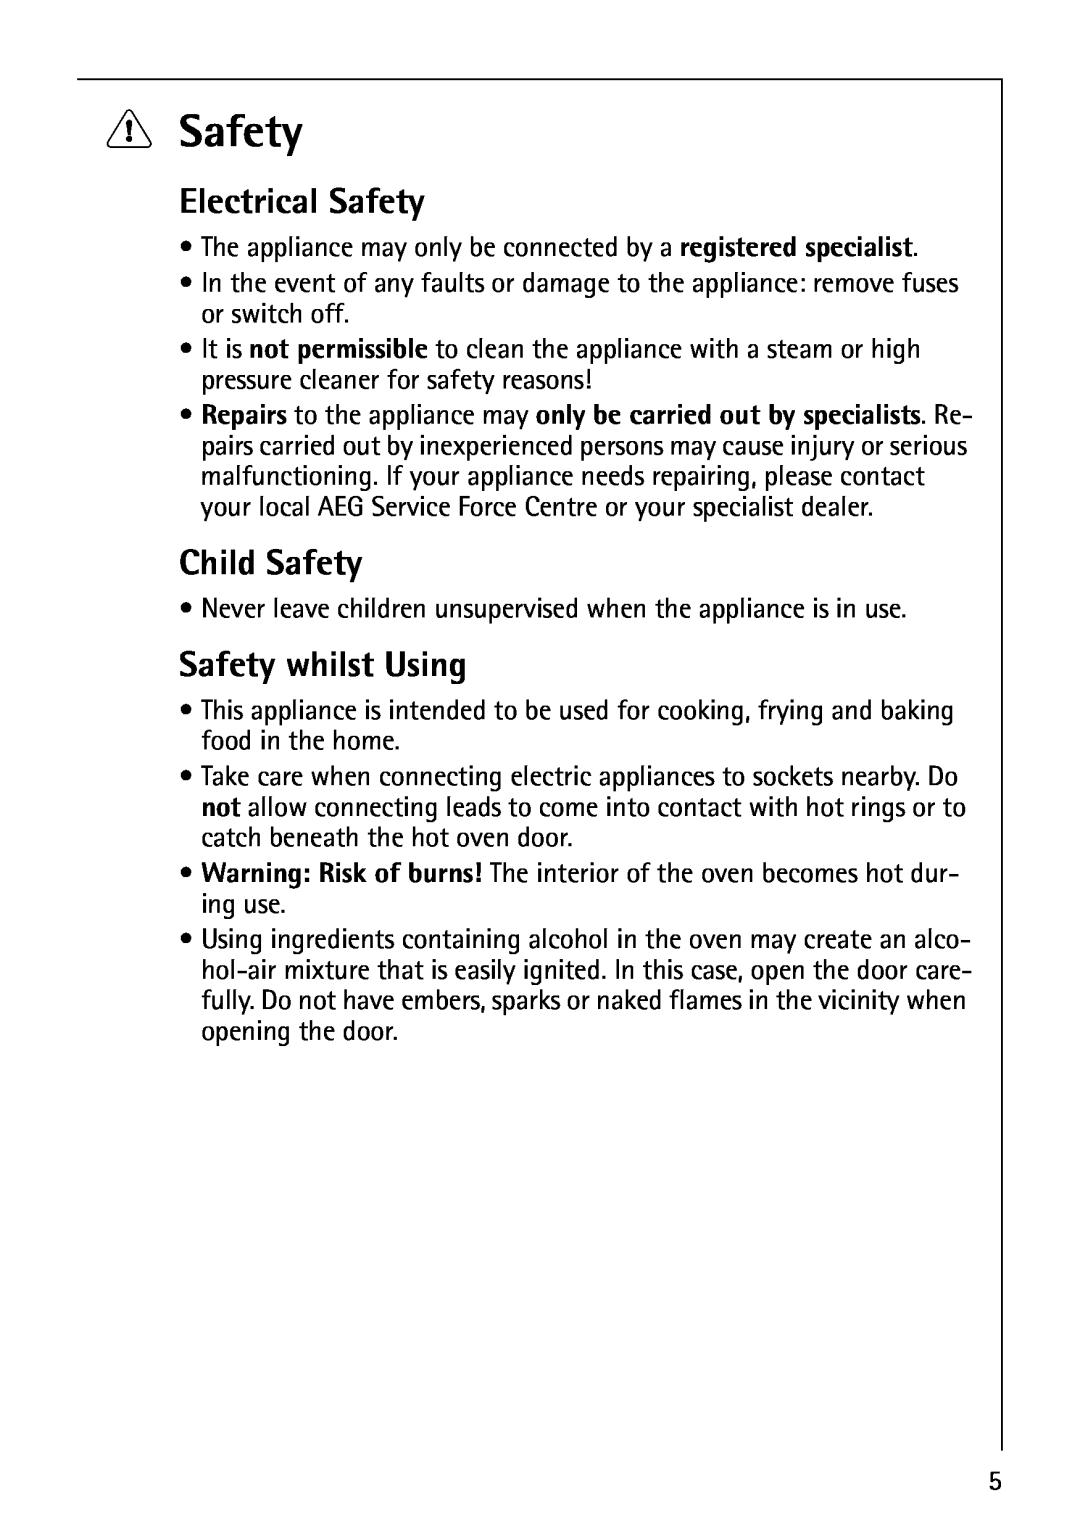 Electrolux B1100-3 manual Electrical Safety, Child Safety, Safety whilst Using 